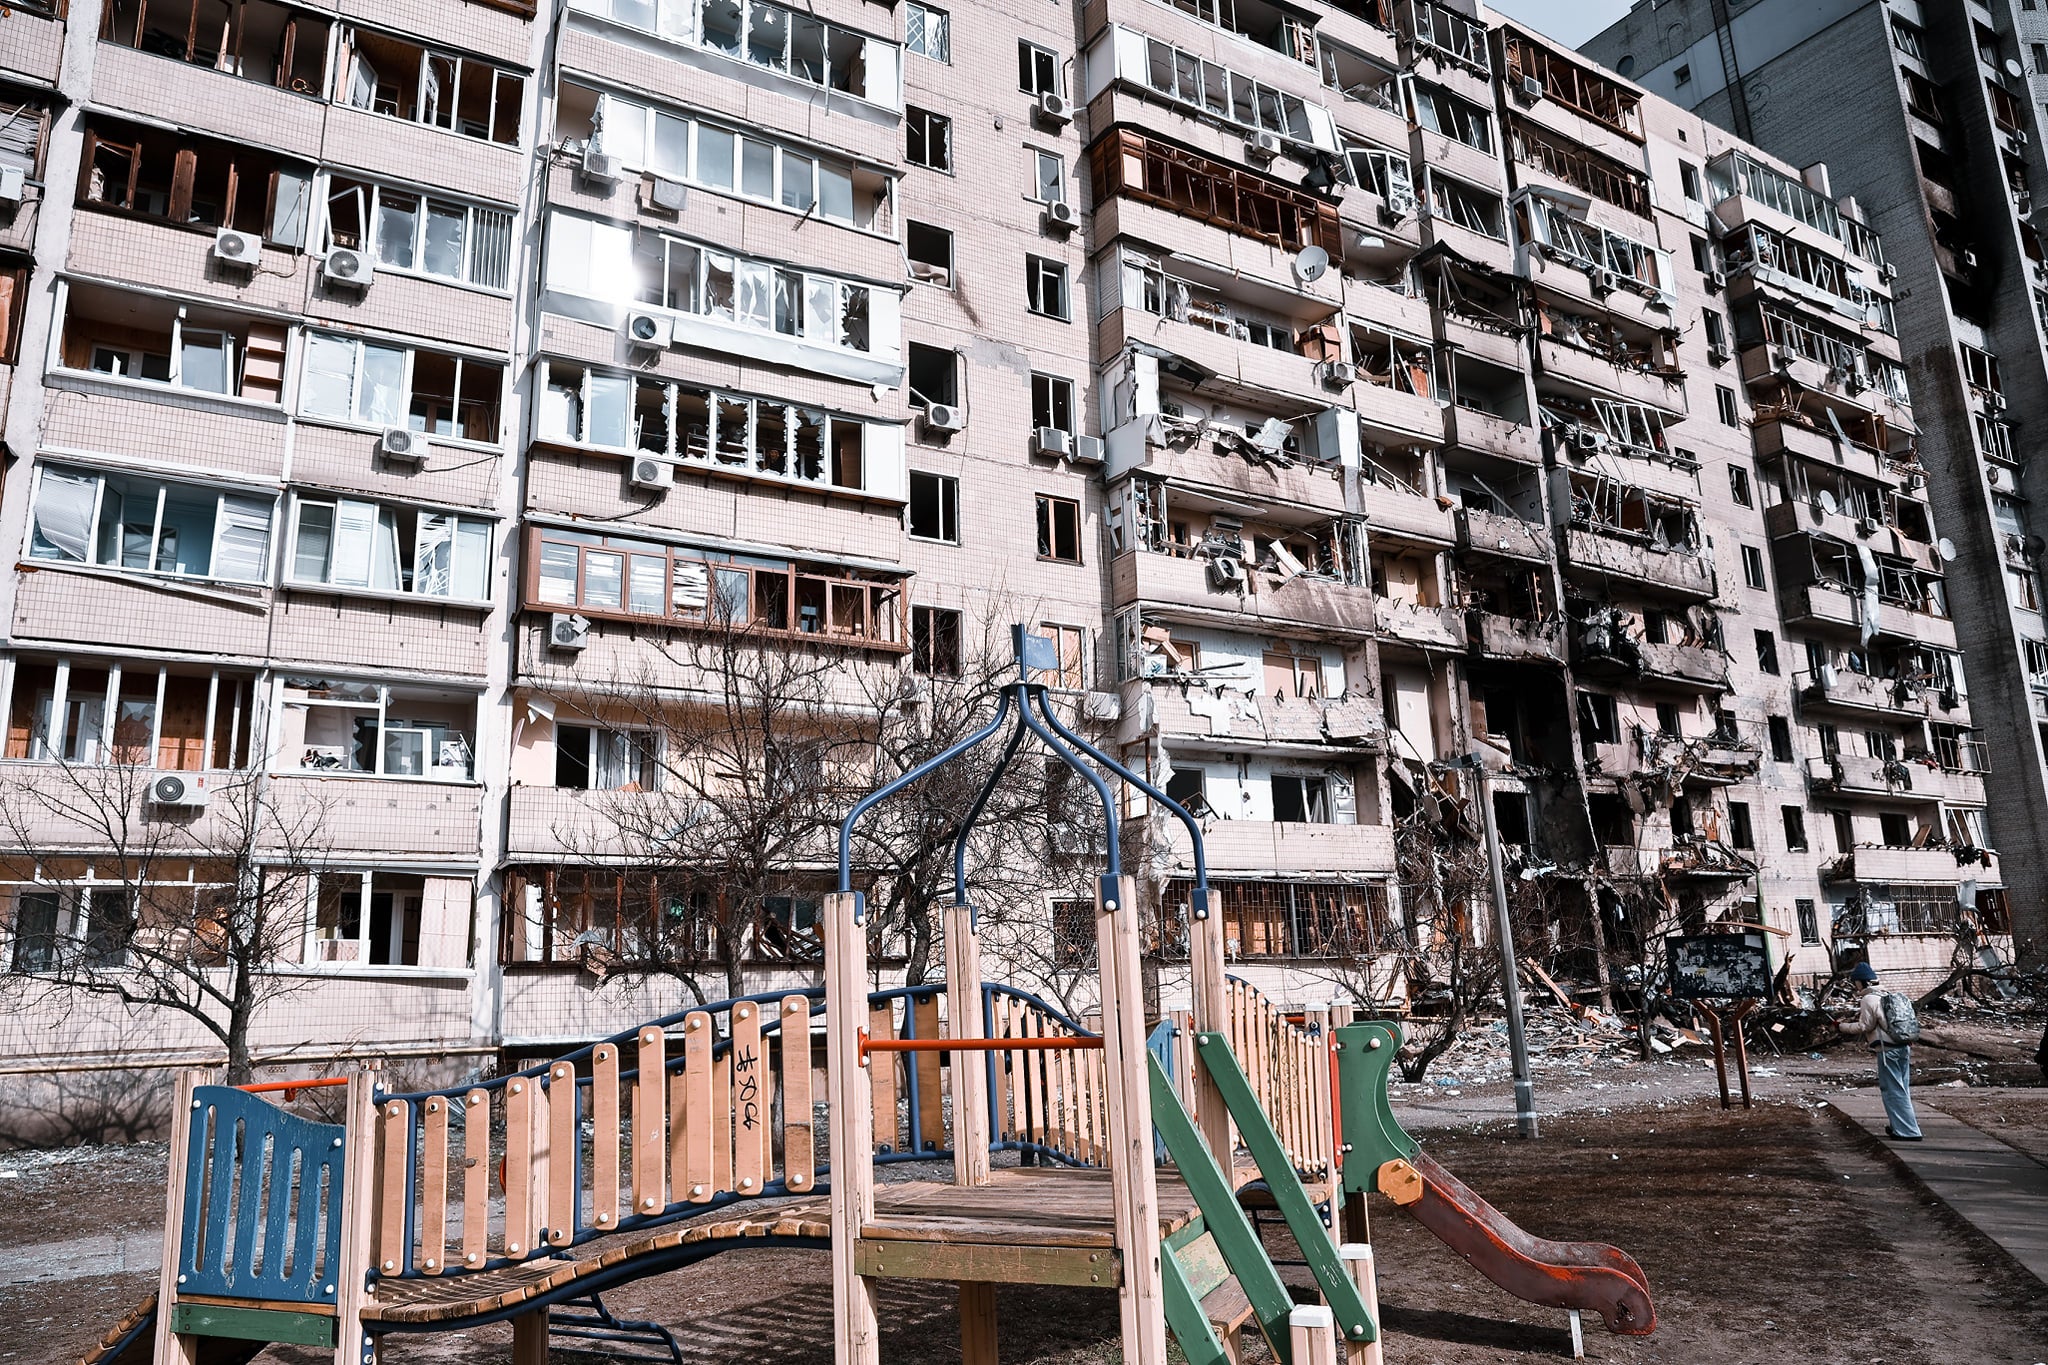 Damage to property in Kyiv caused by an explosion during Russia’s invasion (Maia Mikhaluk/PA)